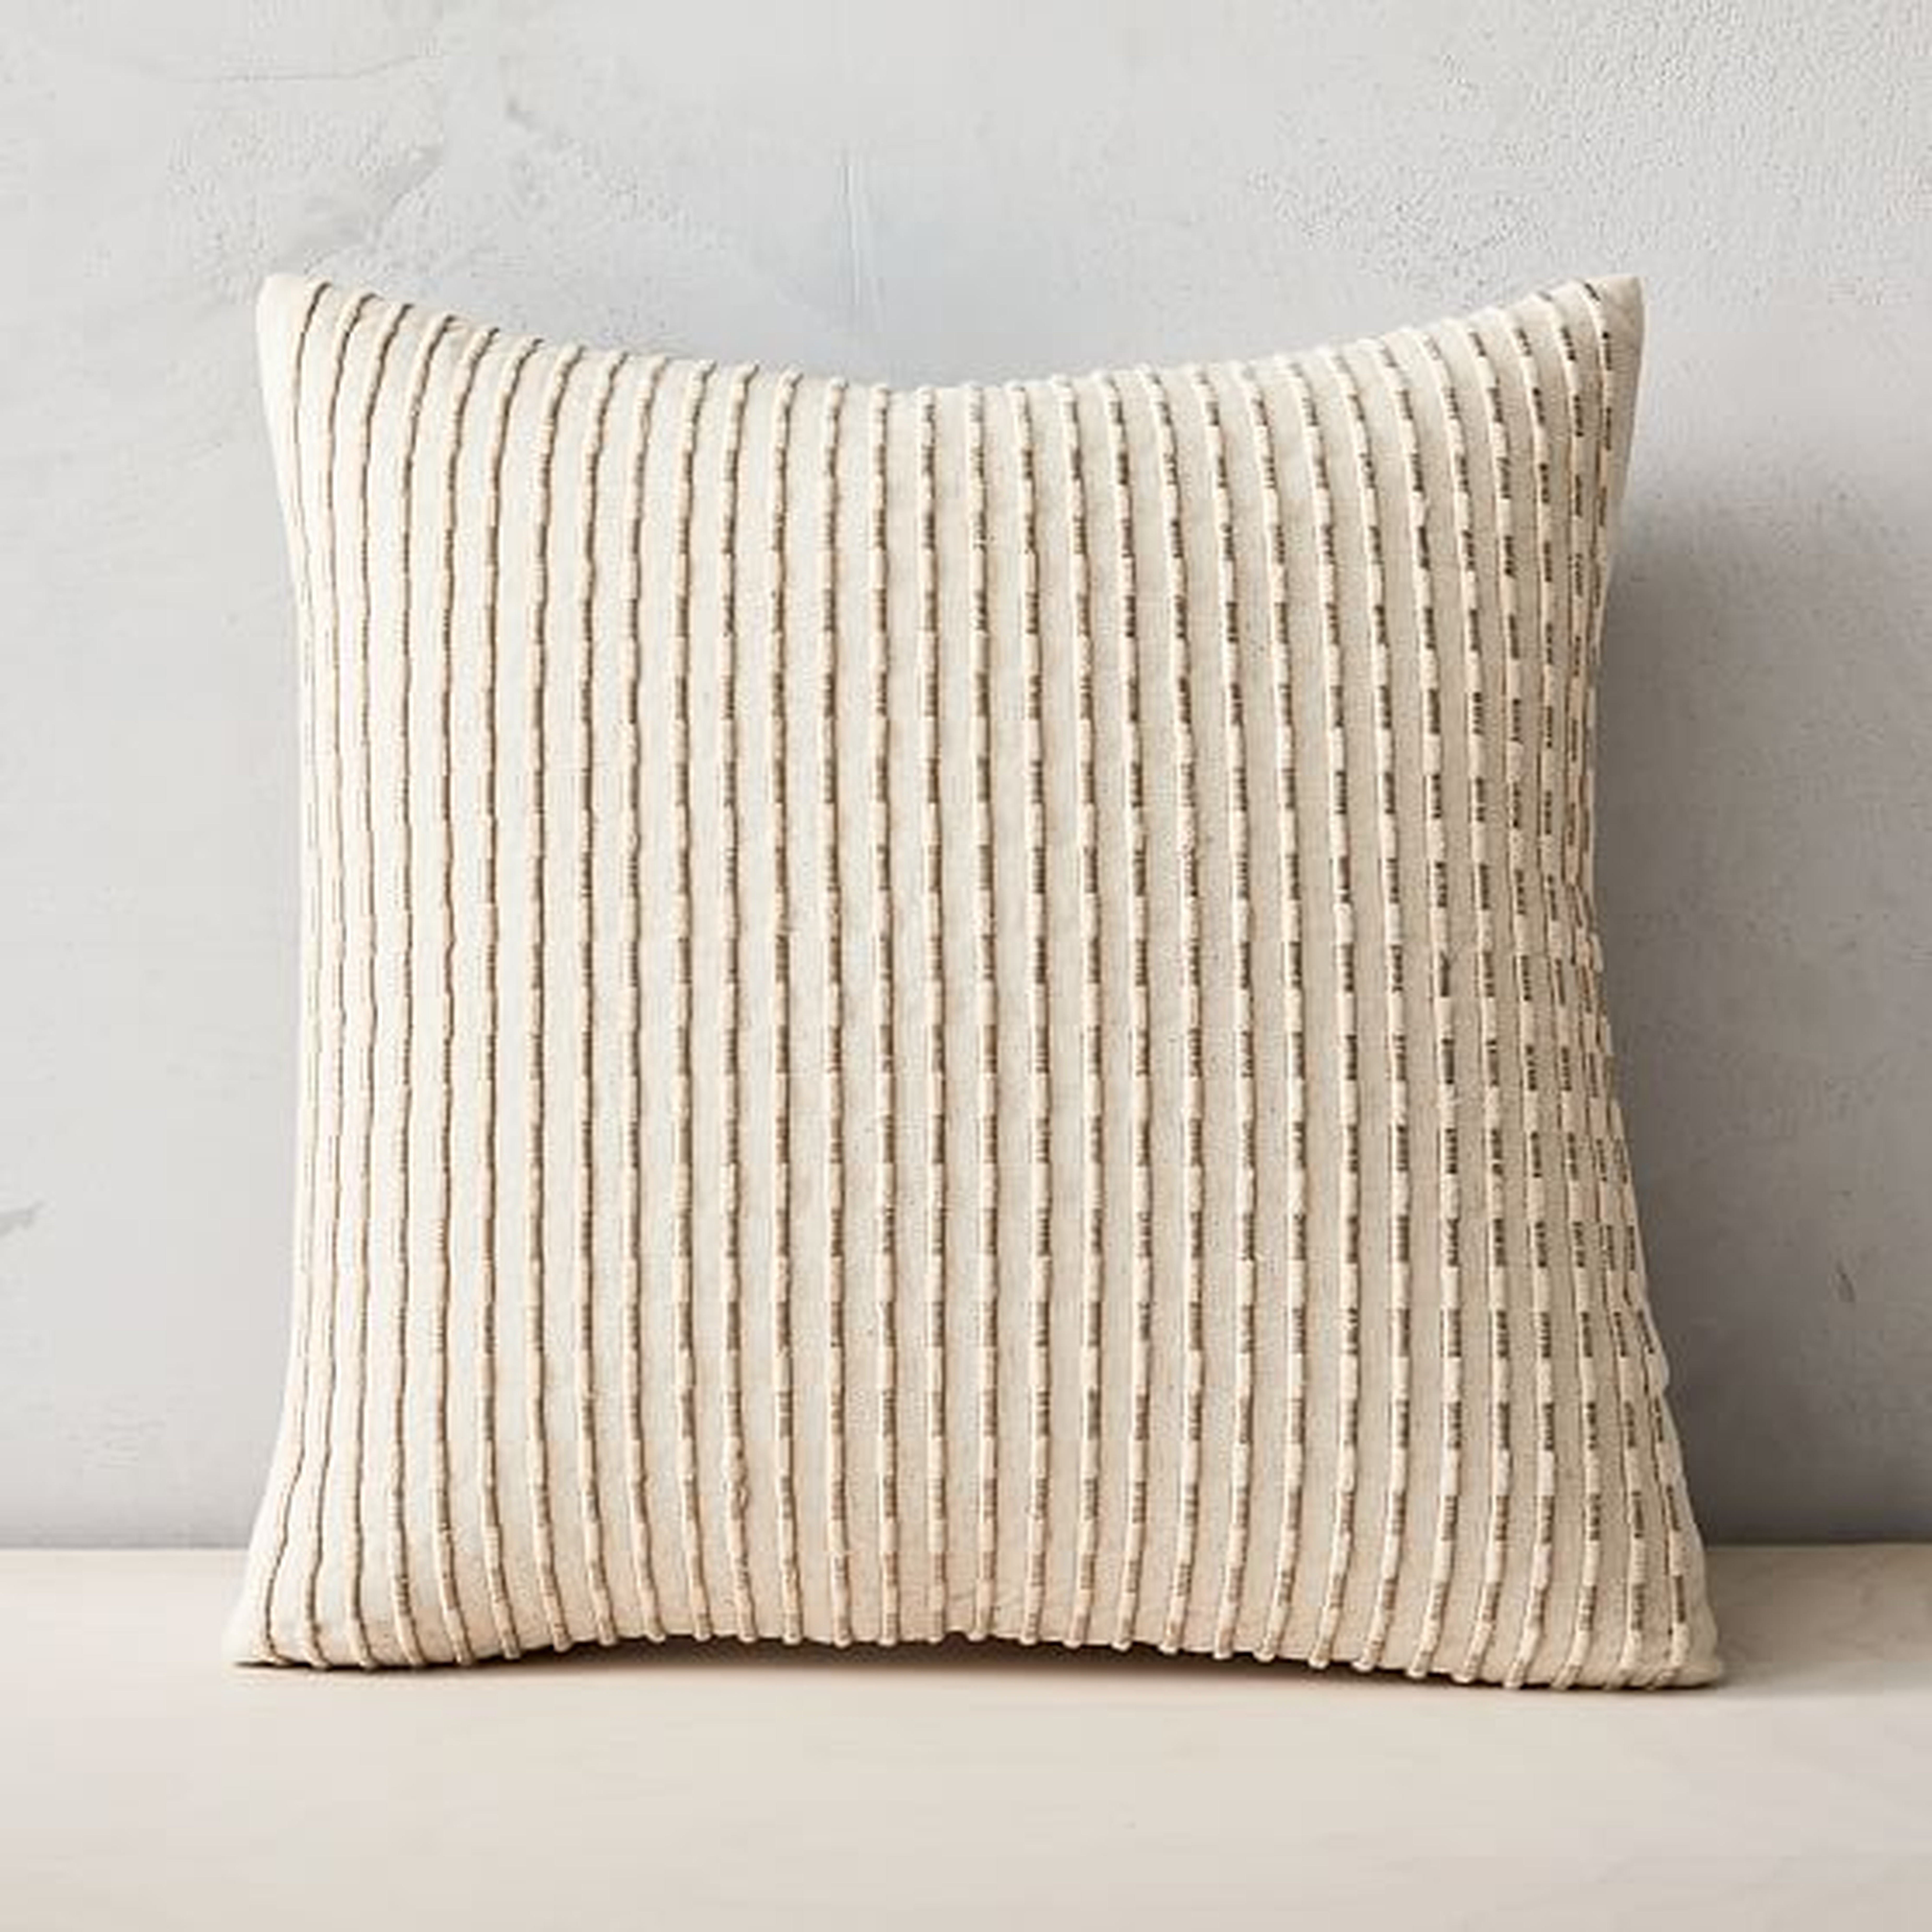 Corded Metallic Pillow Cover, 18" x 18", Natural - West Elm